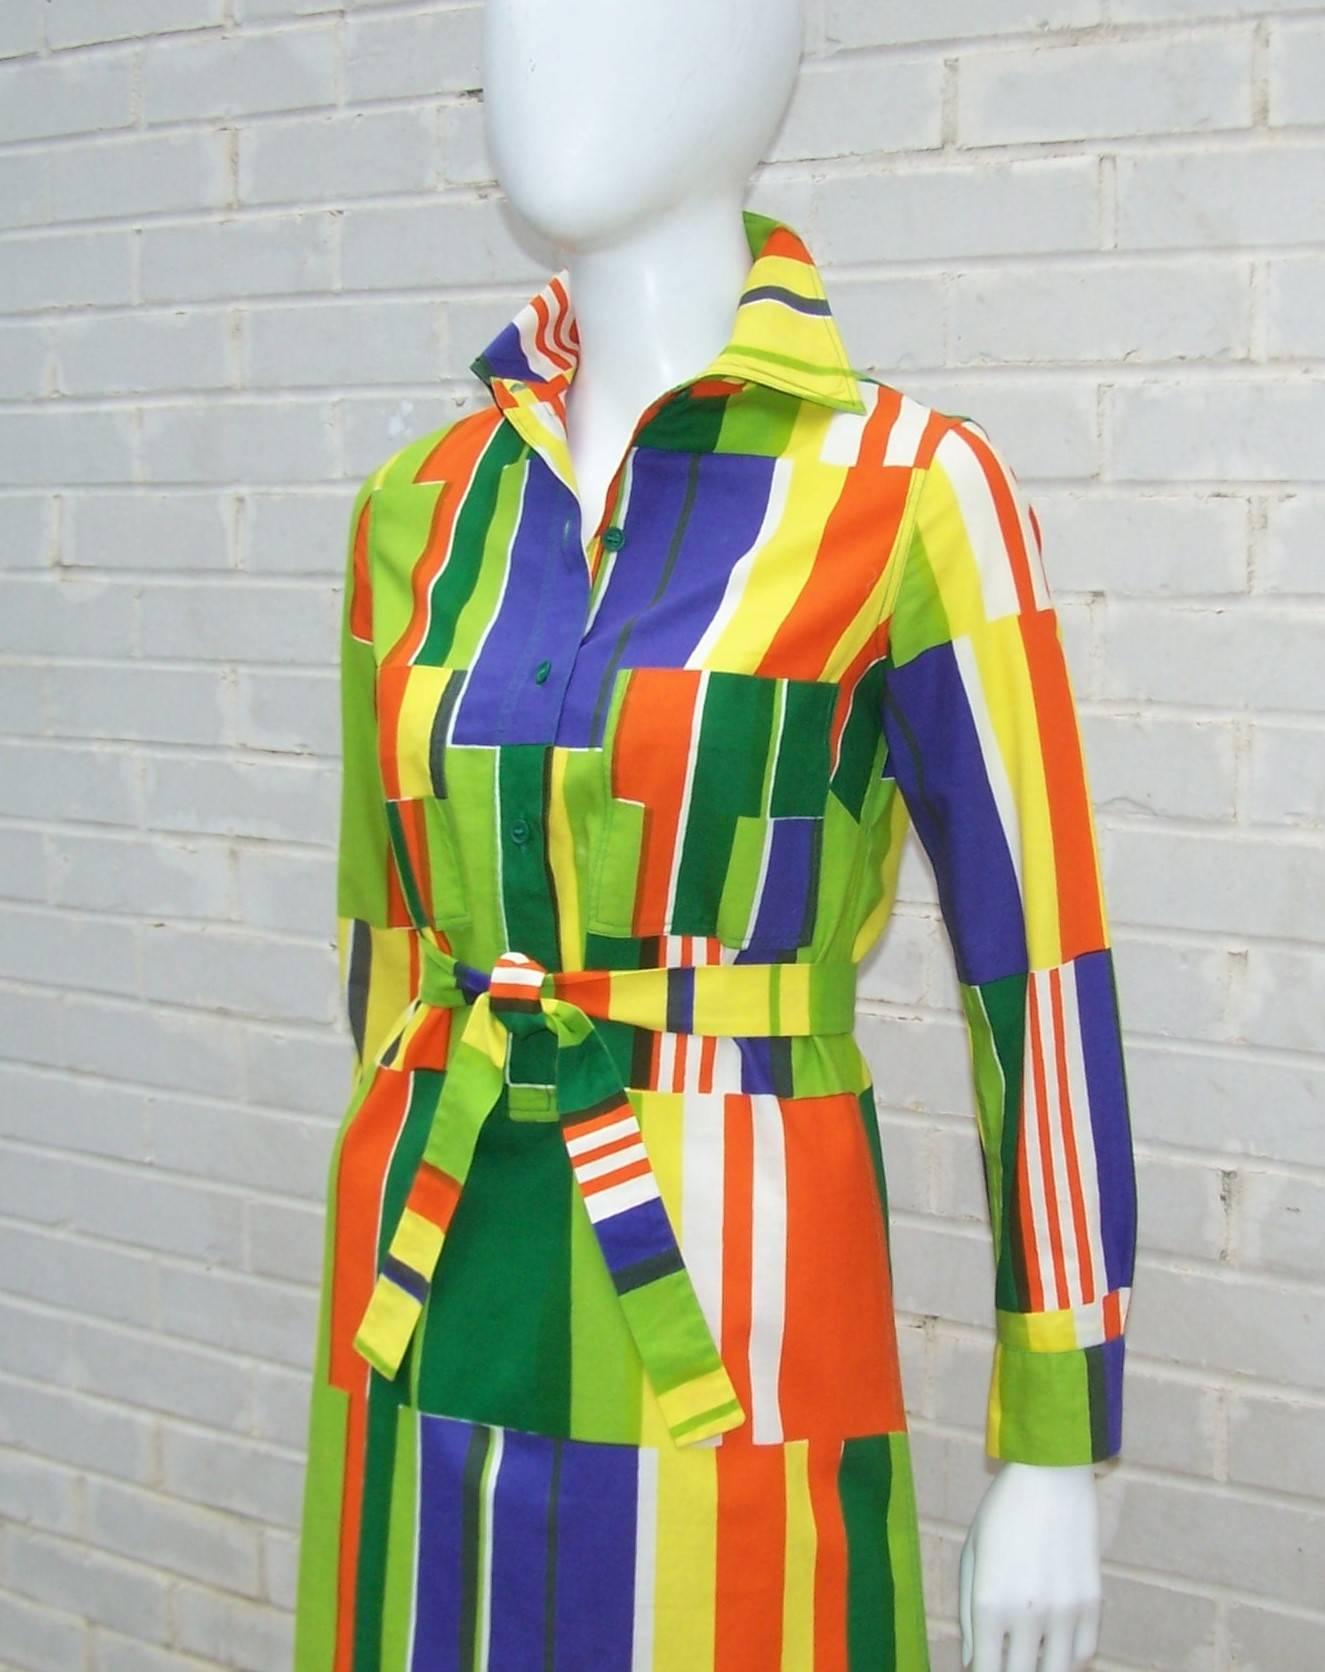 This 1973 Marimekko shirt dress is an eyeful of color and abstraction.  Marimekko started as a textile company in the 1950's producing fabrics for home decor which they eventually used to create fashionable easy to wear garments.  Their mod motifs